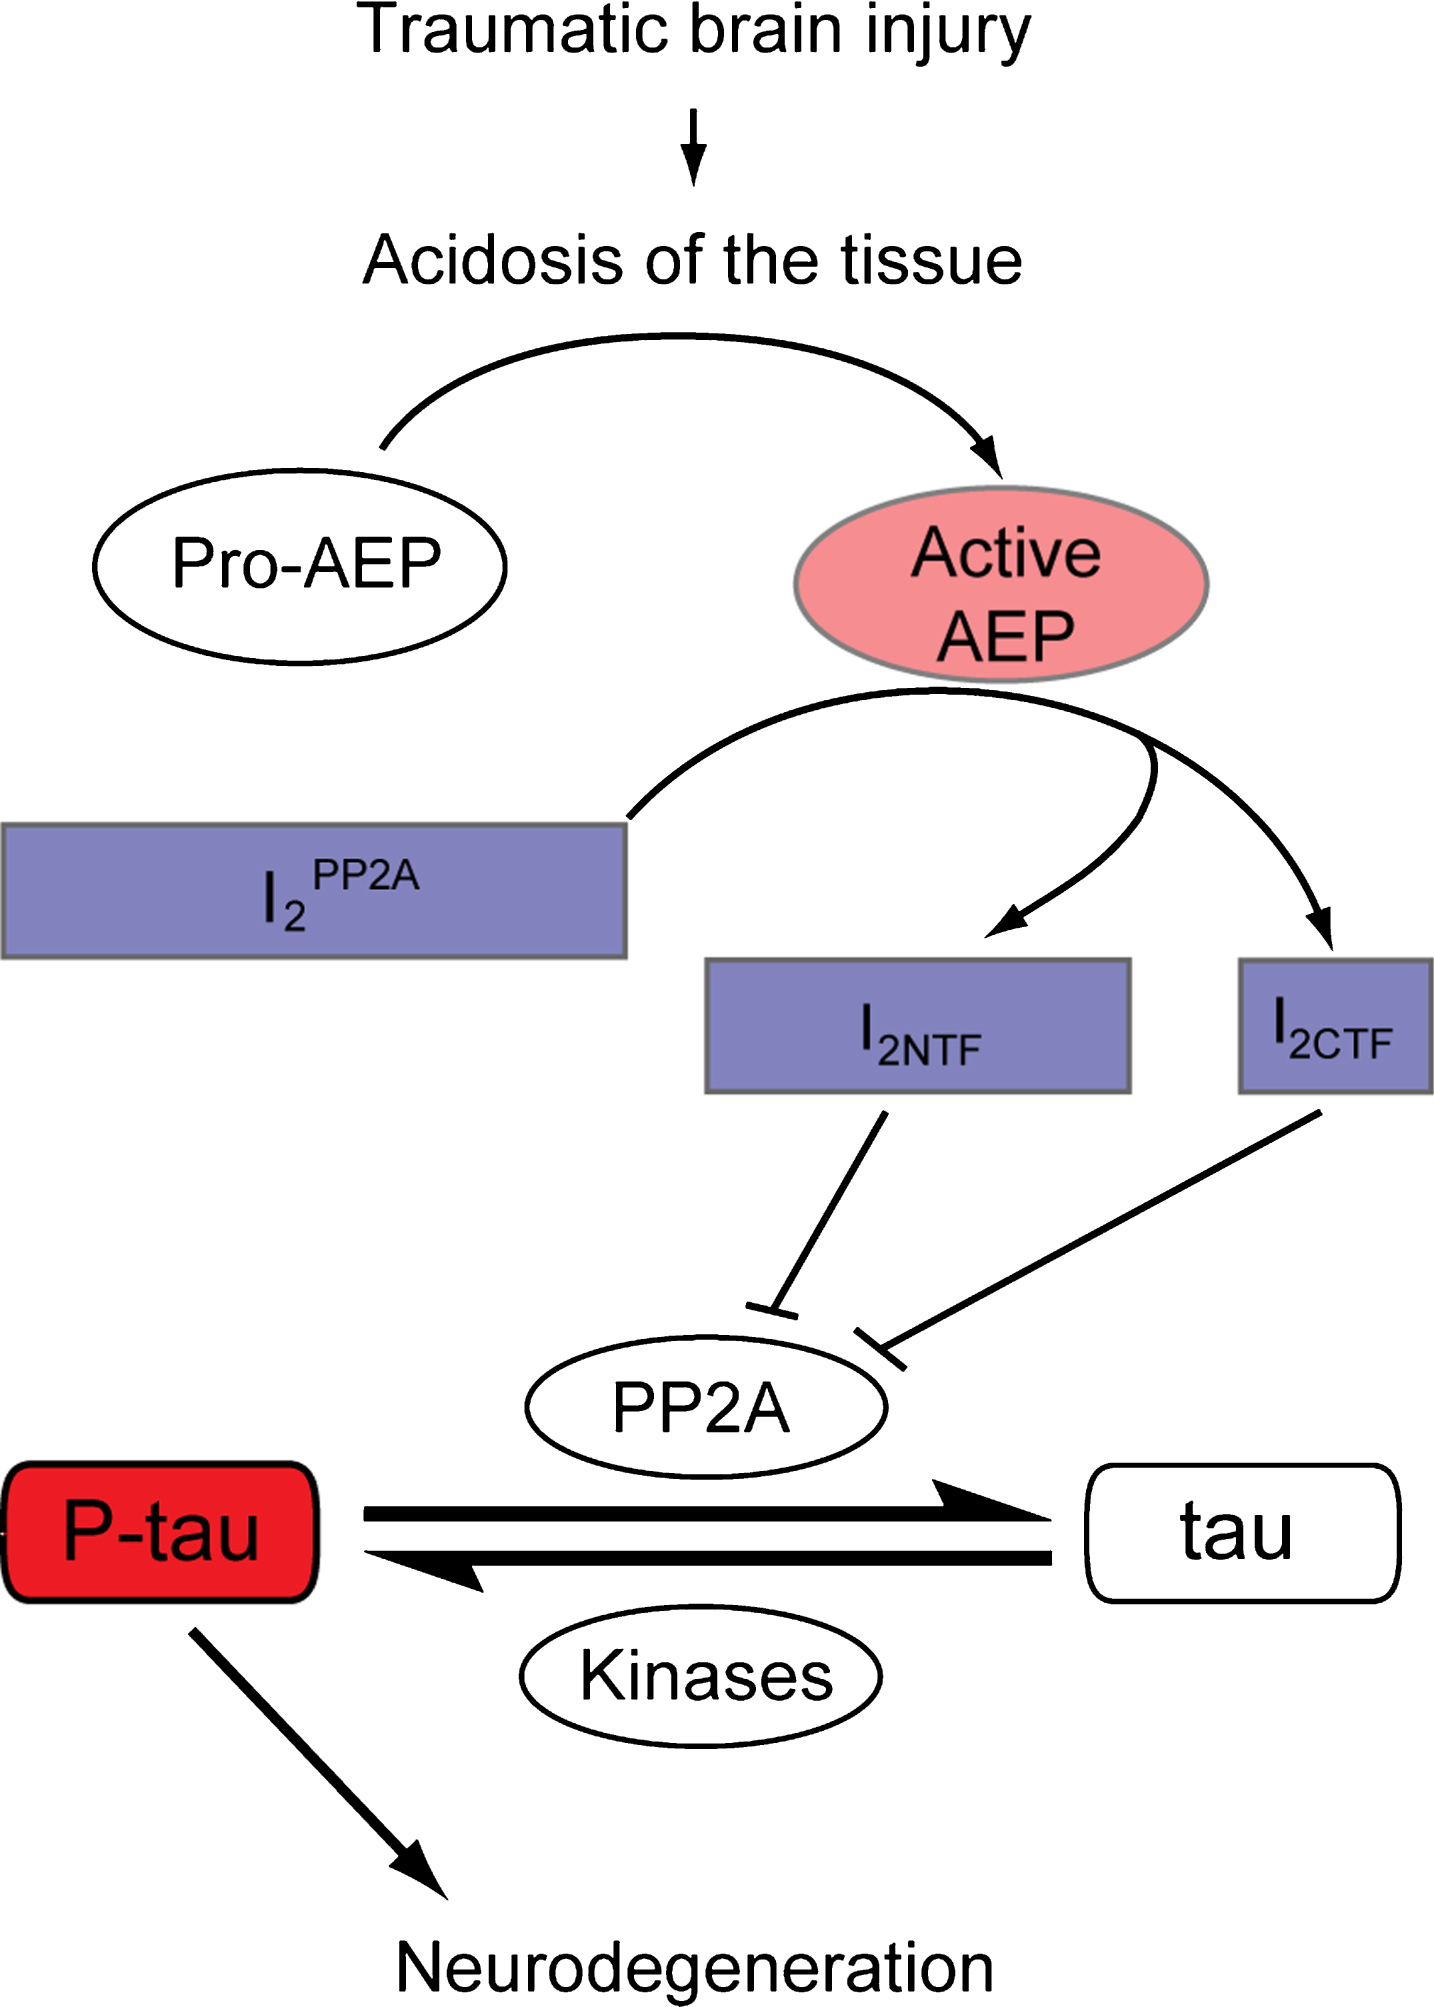 Proposed model demonstrating the involvement of AEP activation in tau hyperphosphorylation in TBI. TBI induces acidosis of the brain tissue, which increases the level of active AEP and its translocation from neuronal lysosomes to the cytoplasm and the nucleus. Active AEP cleaves I2PP2A into amino- and carboxy-terminal fragments [38], both of which are translocated to the cytoplasm and inhibit PP2A activity [36], leading to hyperphosphorylation of tau. I2PP2A, inhibitor 2 of protein phosphatase 2A; I2NTF, amino-terminal fragment of I2PP2A; I2CTF, carboxy-terminal fragment of I2PP2A; P-tau, hyperphosphorylated tau.